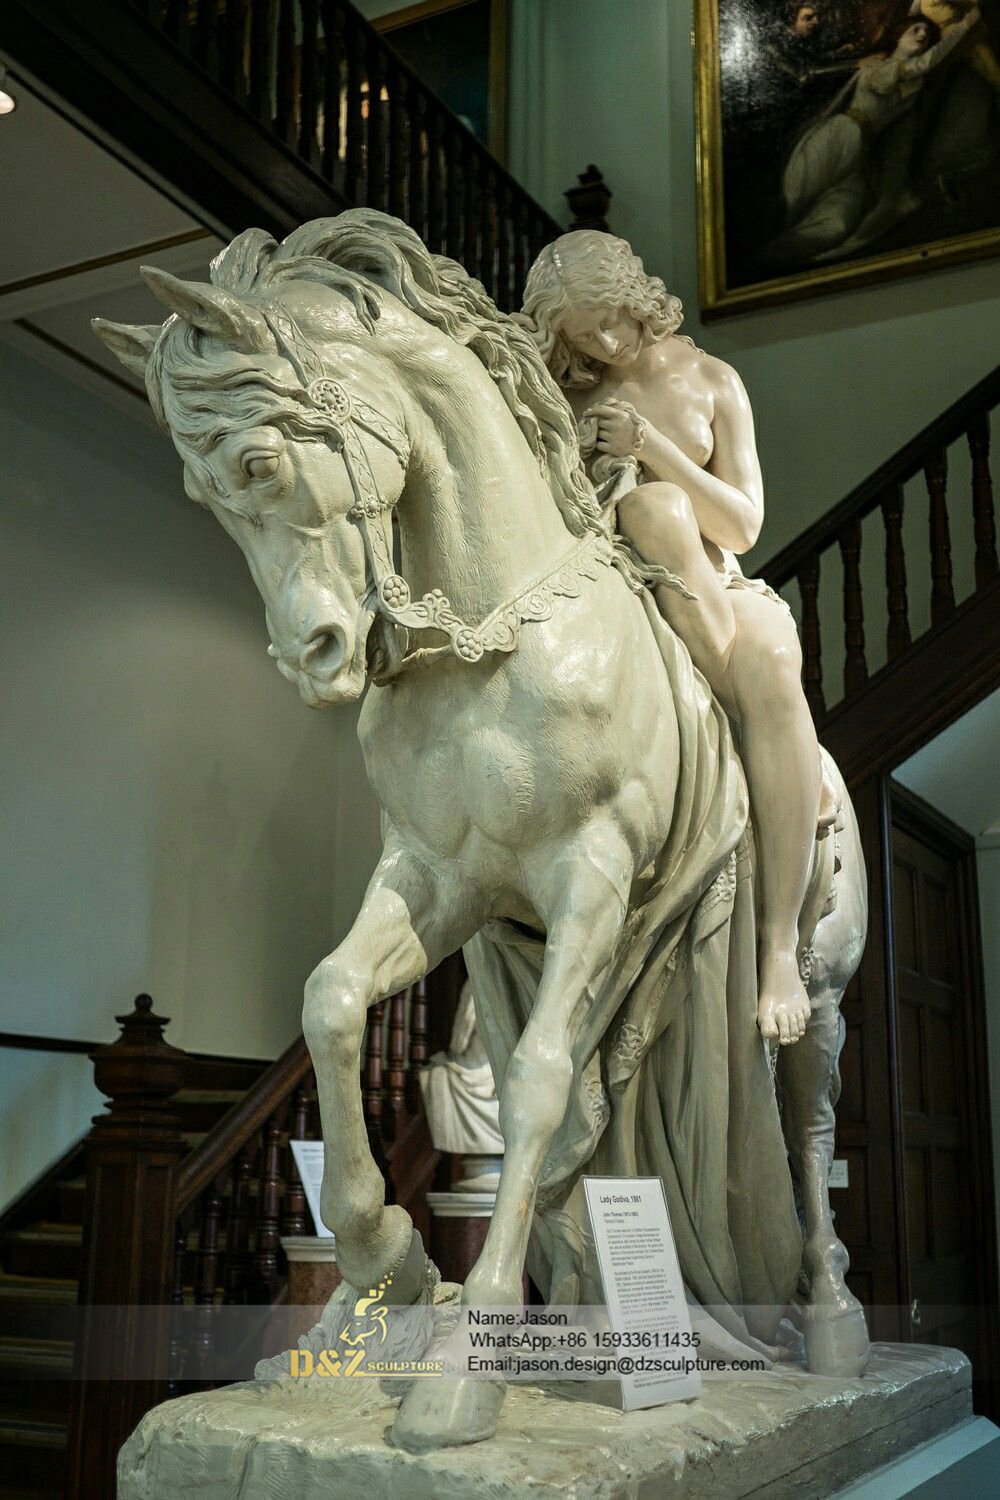 Horse and woman sculptures